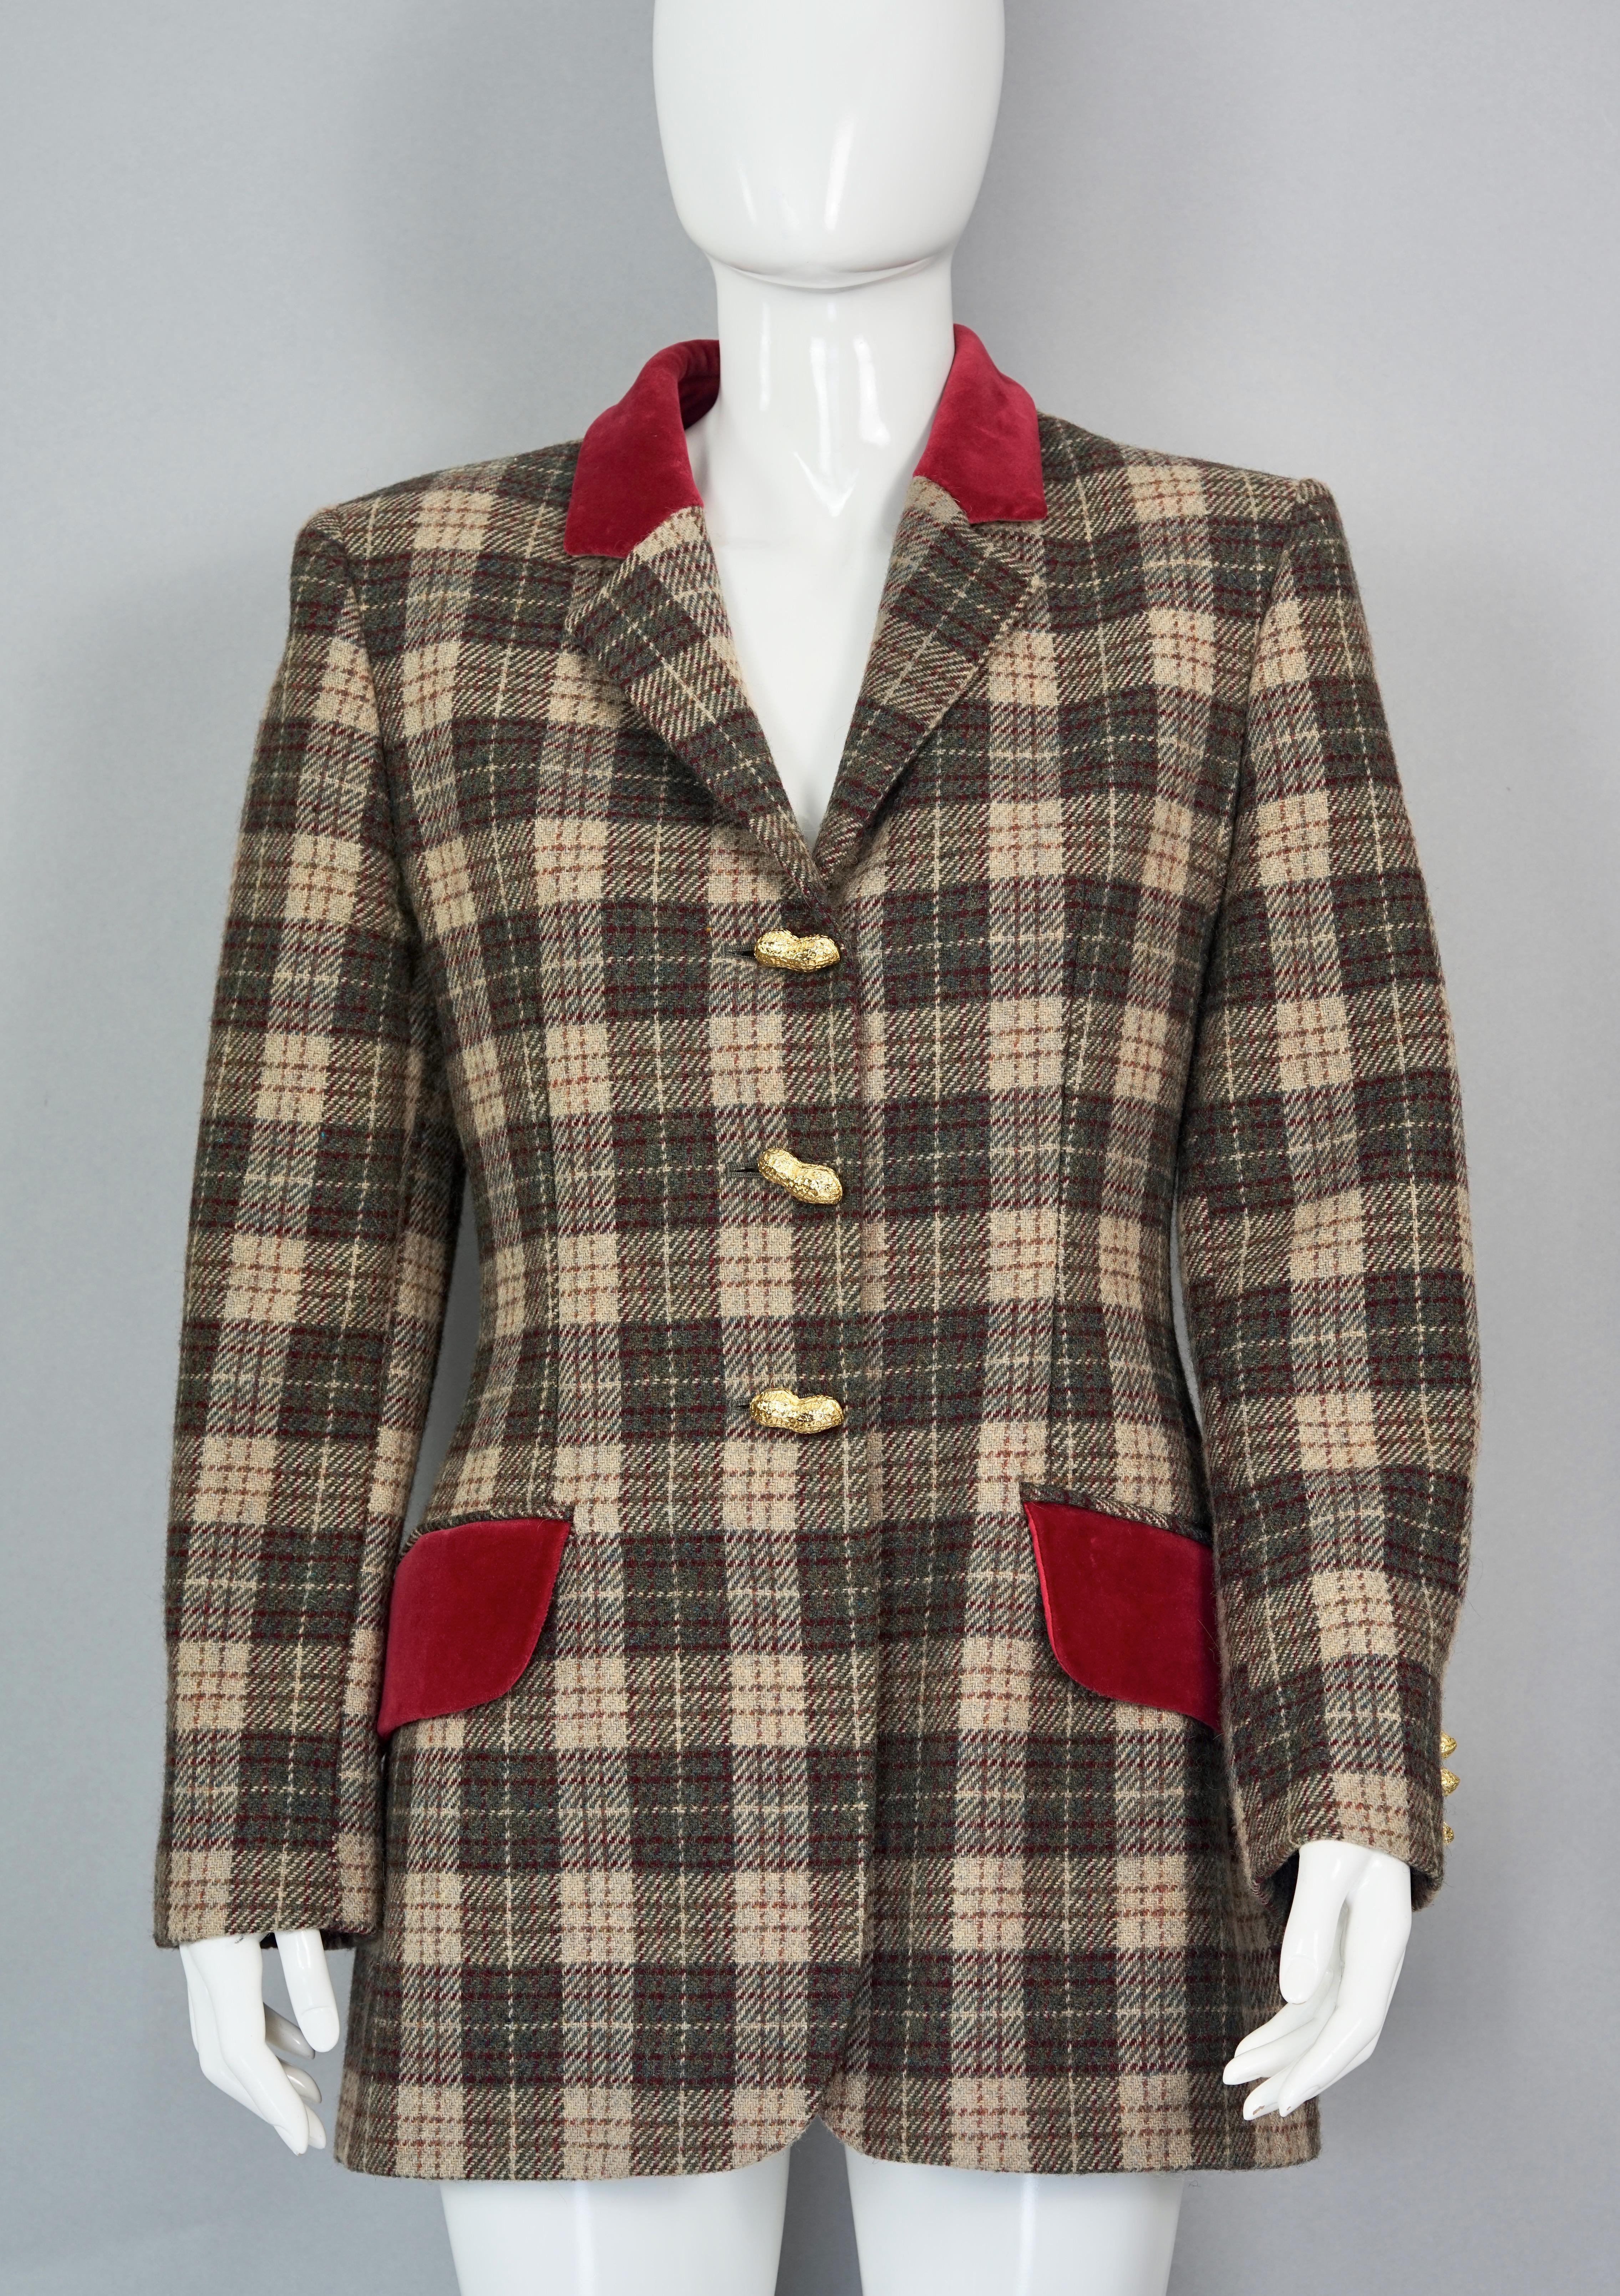 Vintage MOSCHINO CHEAP and CHIC Peanut Button Tartan Blazer Jacket

Measurements taken laid flat:
Shoulder: 16.53 inches (42 cm)
Sleeves: 23.62 inches (60 cm)
Bust: 18.50 inches (47 cm)
Waist: 16.53 inches (42 cm)
Length: 30.31 inches (77